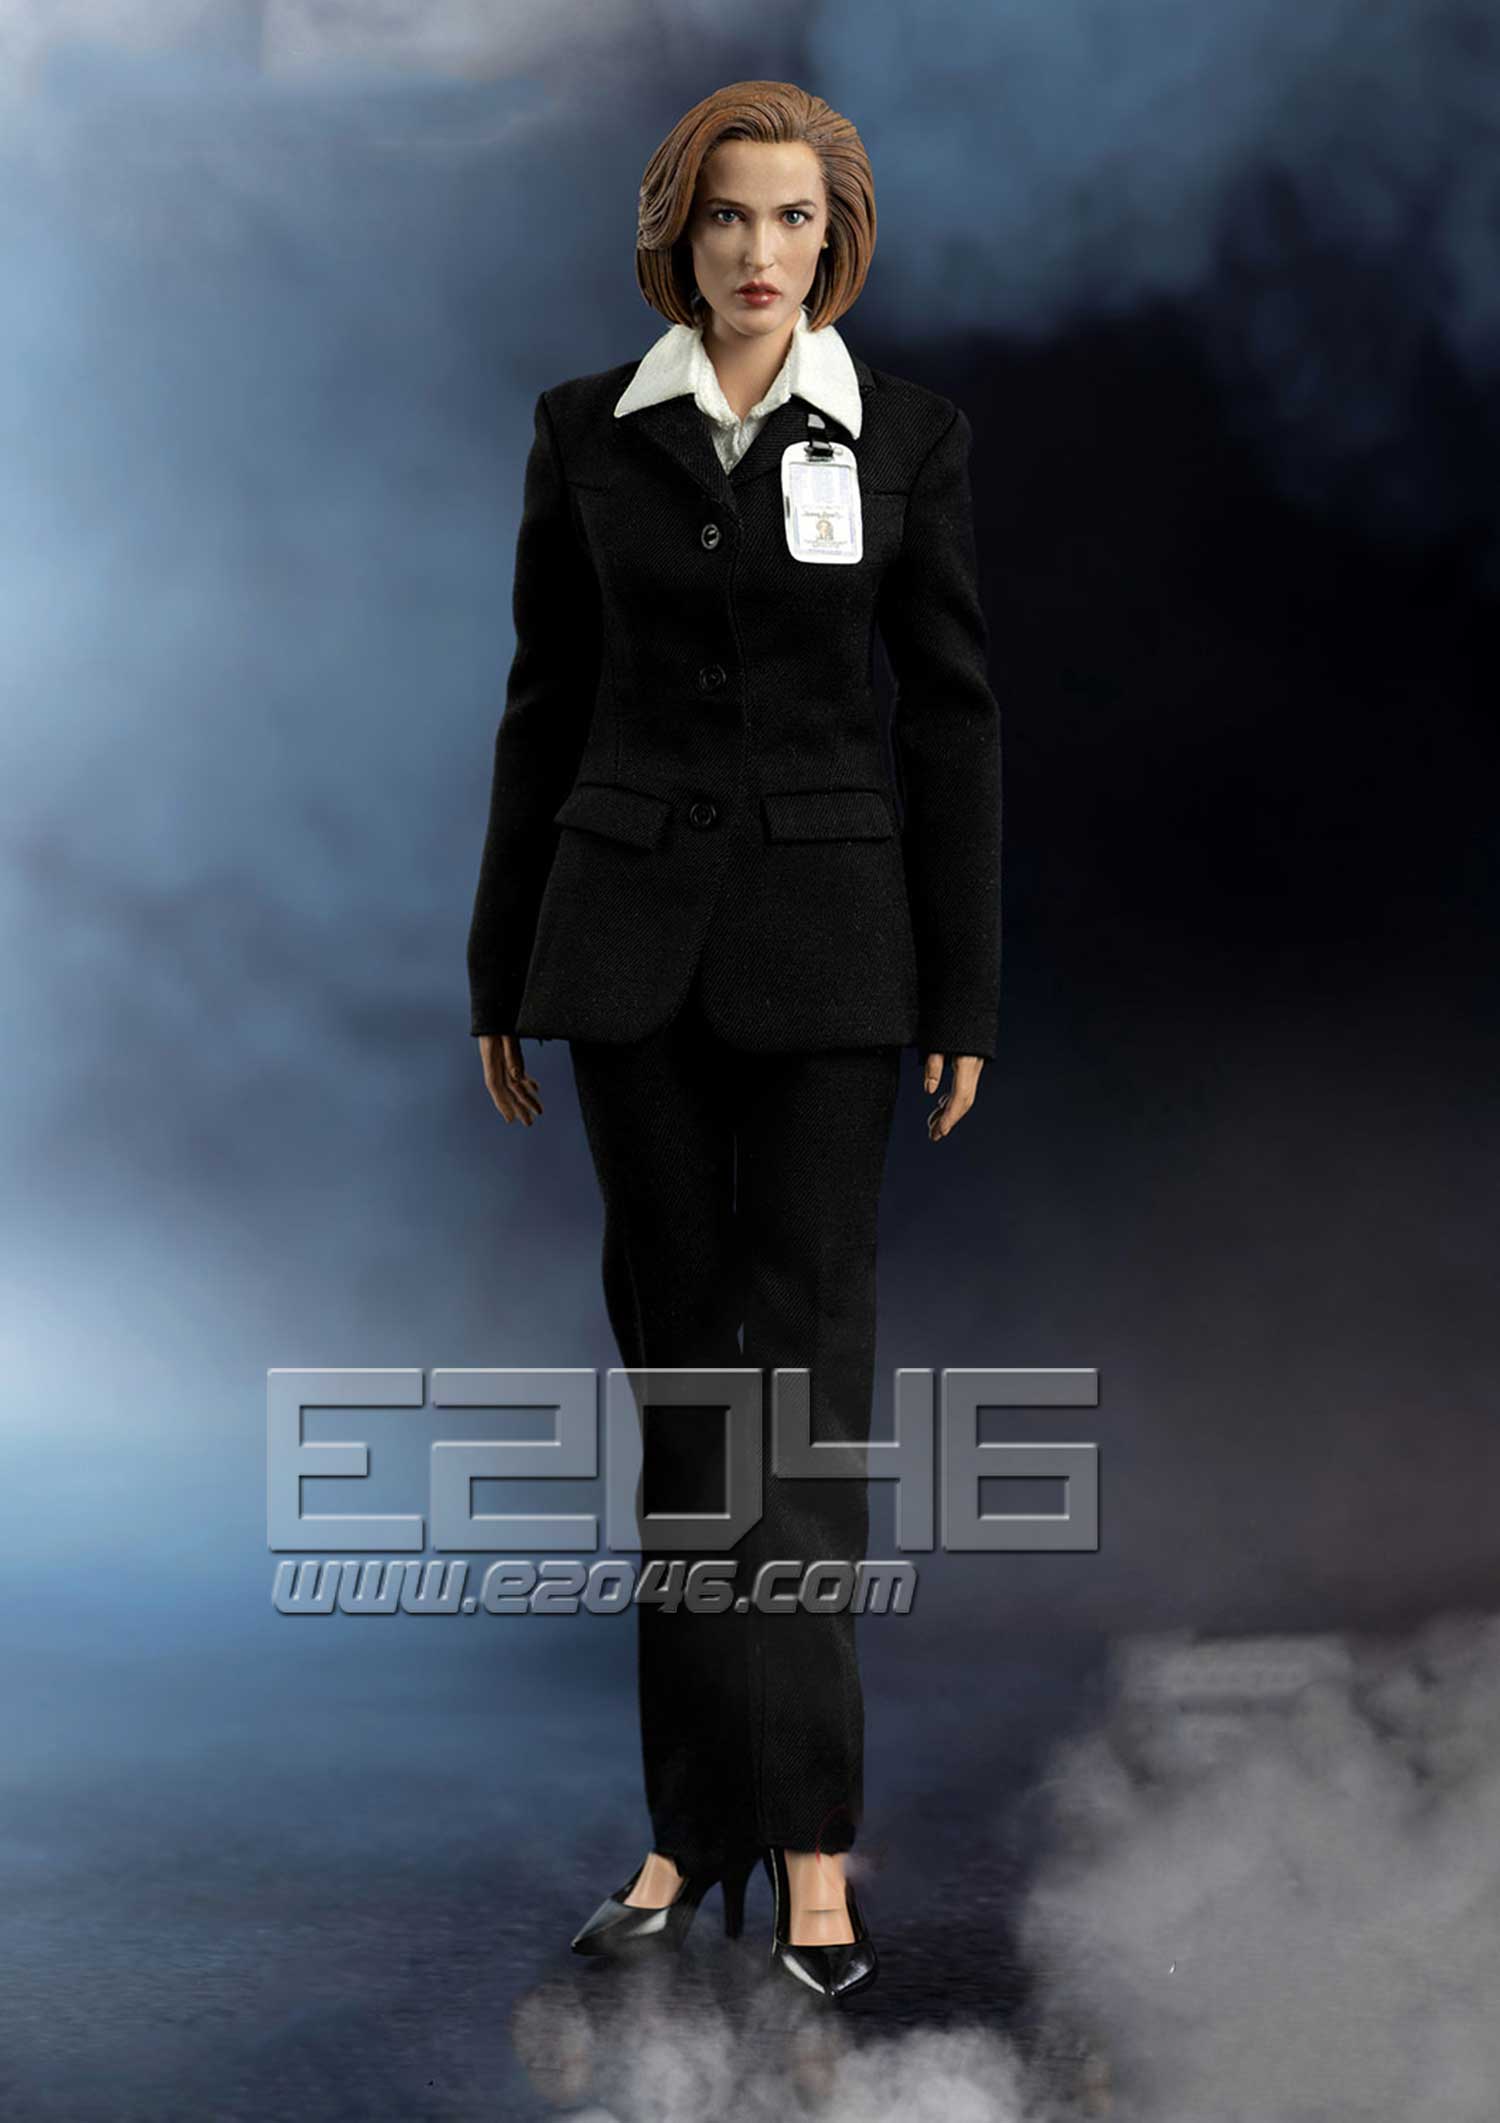 Agent Scully A (DOLL)